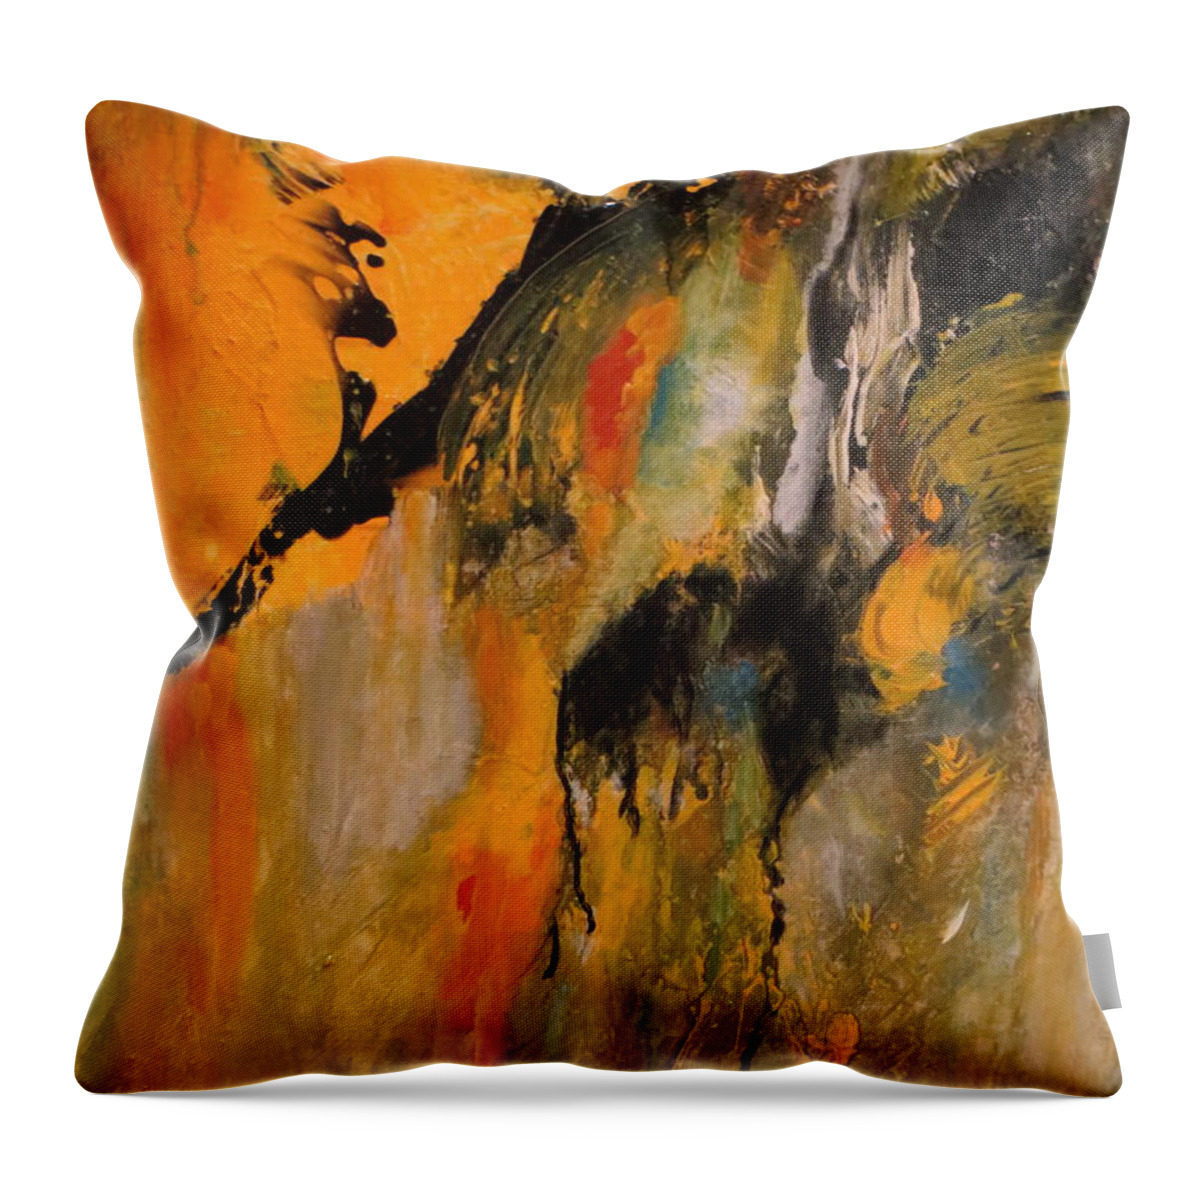 Abstract Throw Pillow featuring the painting Cheeky by Soraya Silvestri